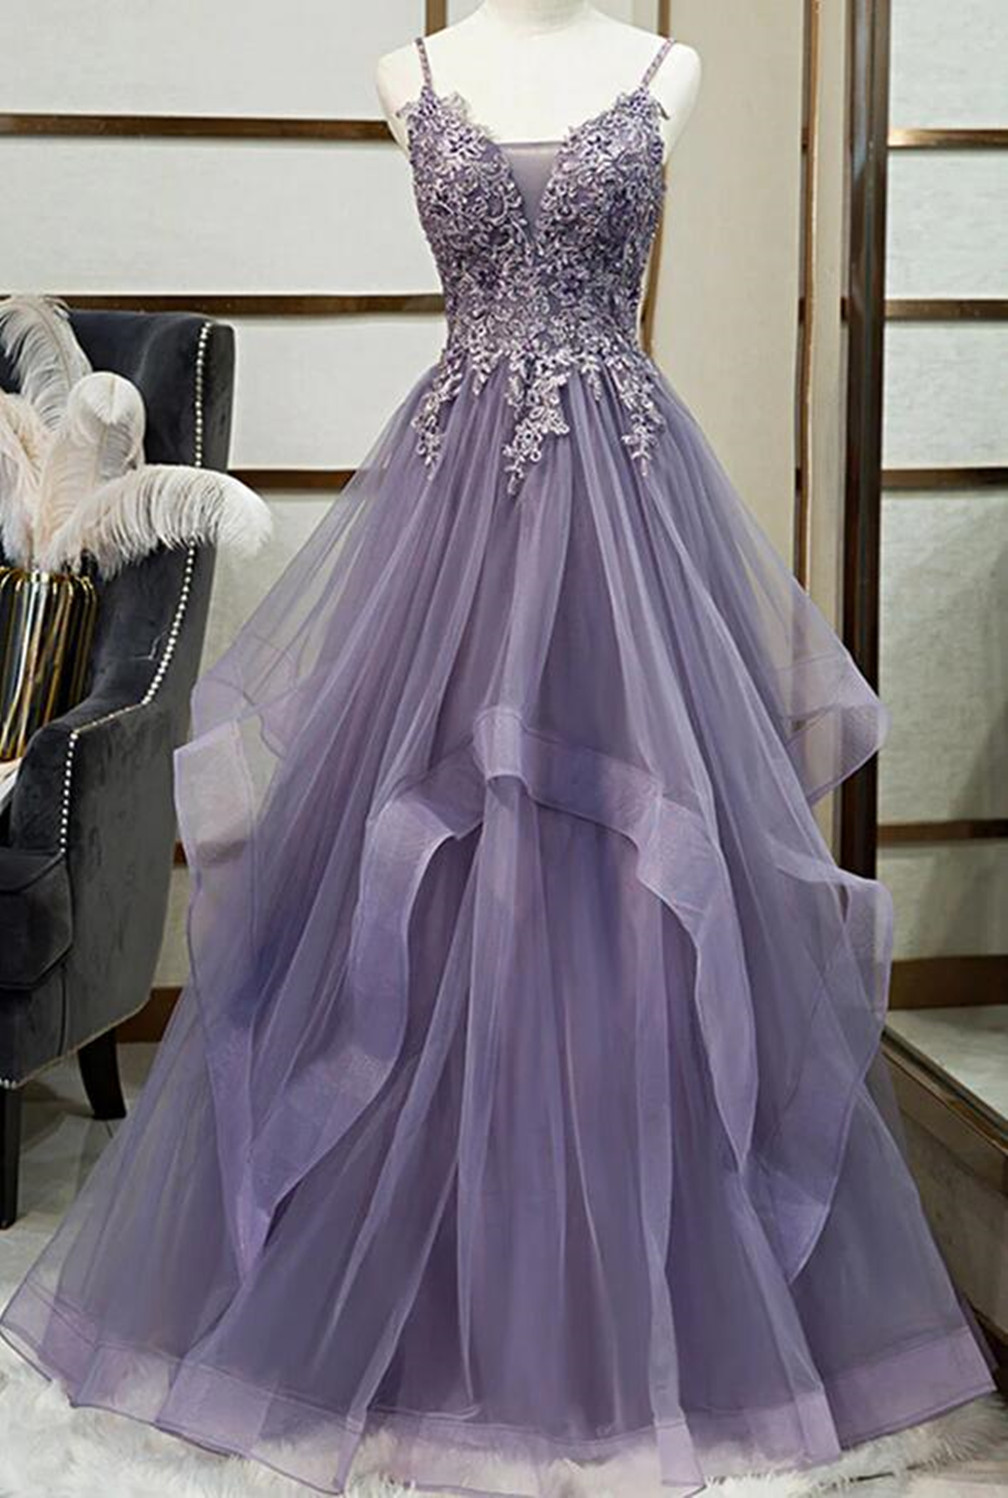 Women Tulle Lace Prom Dresses Long A-line Appliques Evening Party Gowns Sleeveless Formal Dress Yp045